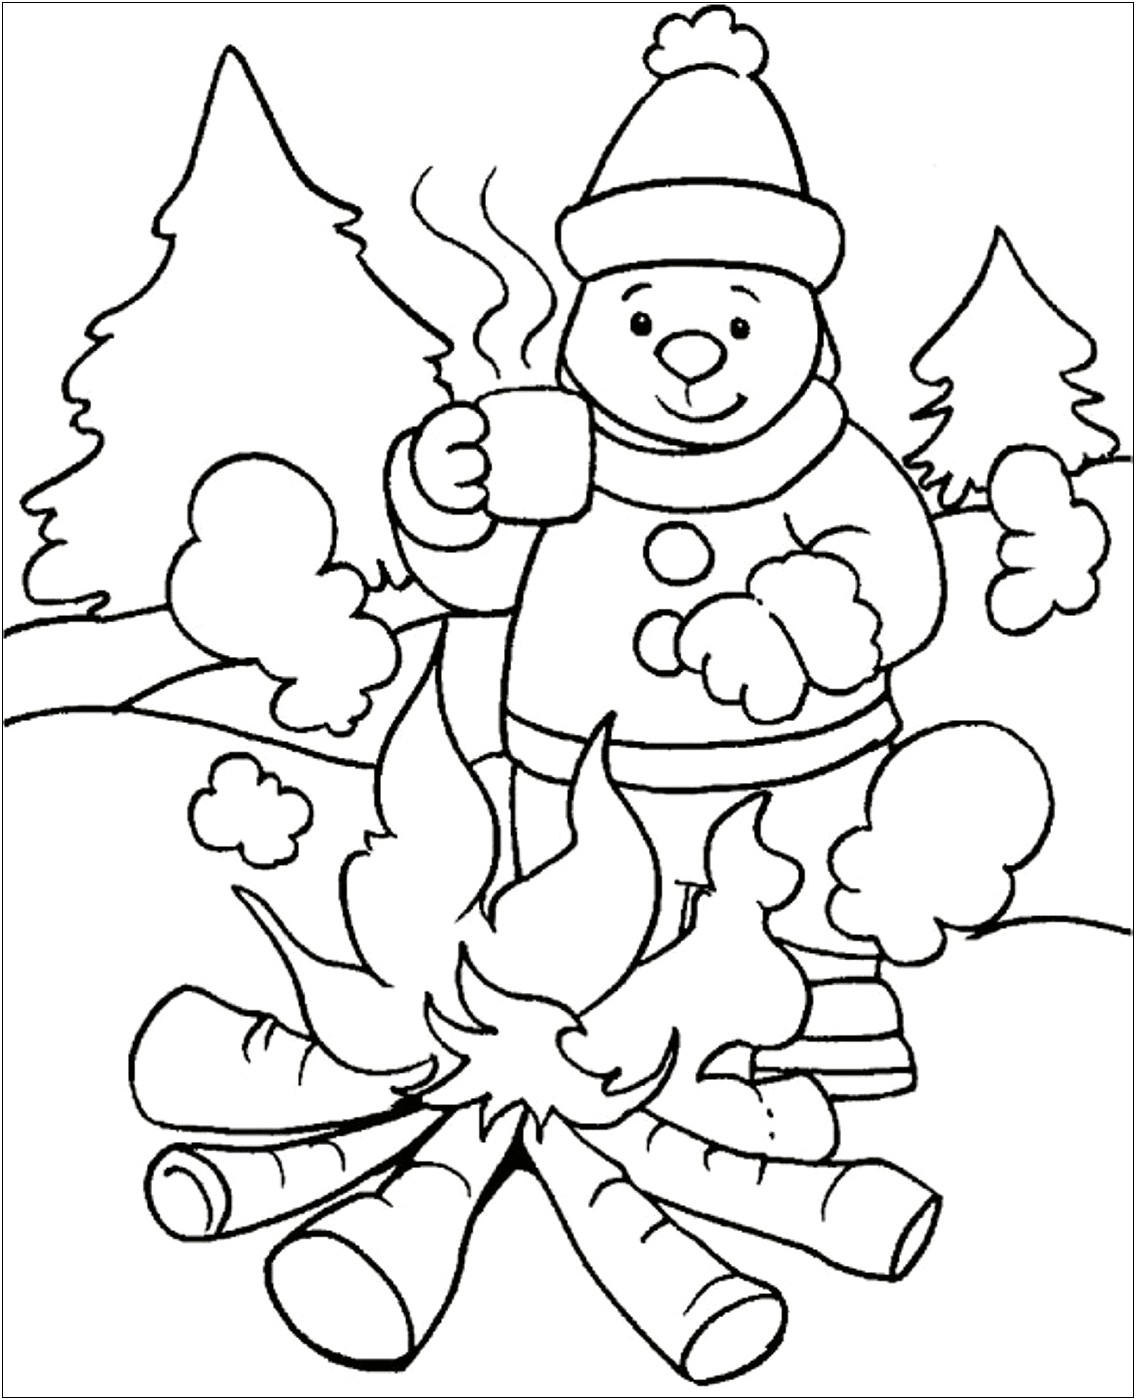 Free Template Of Winter Scene To Print & Color